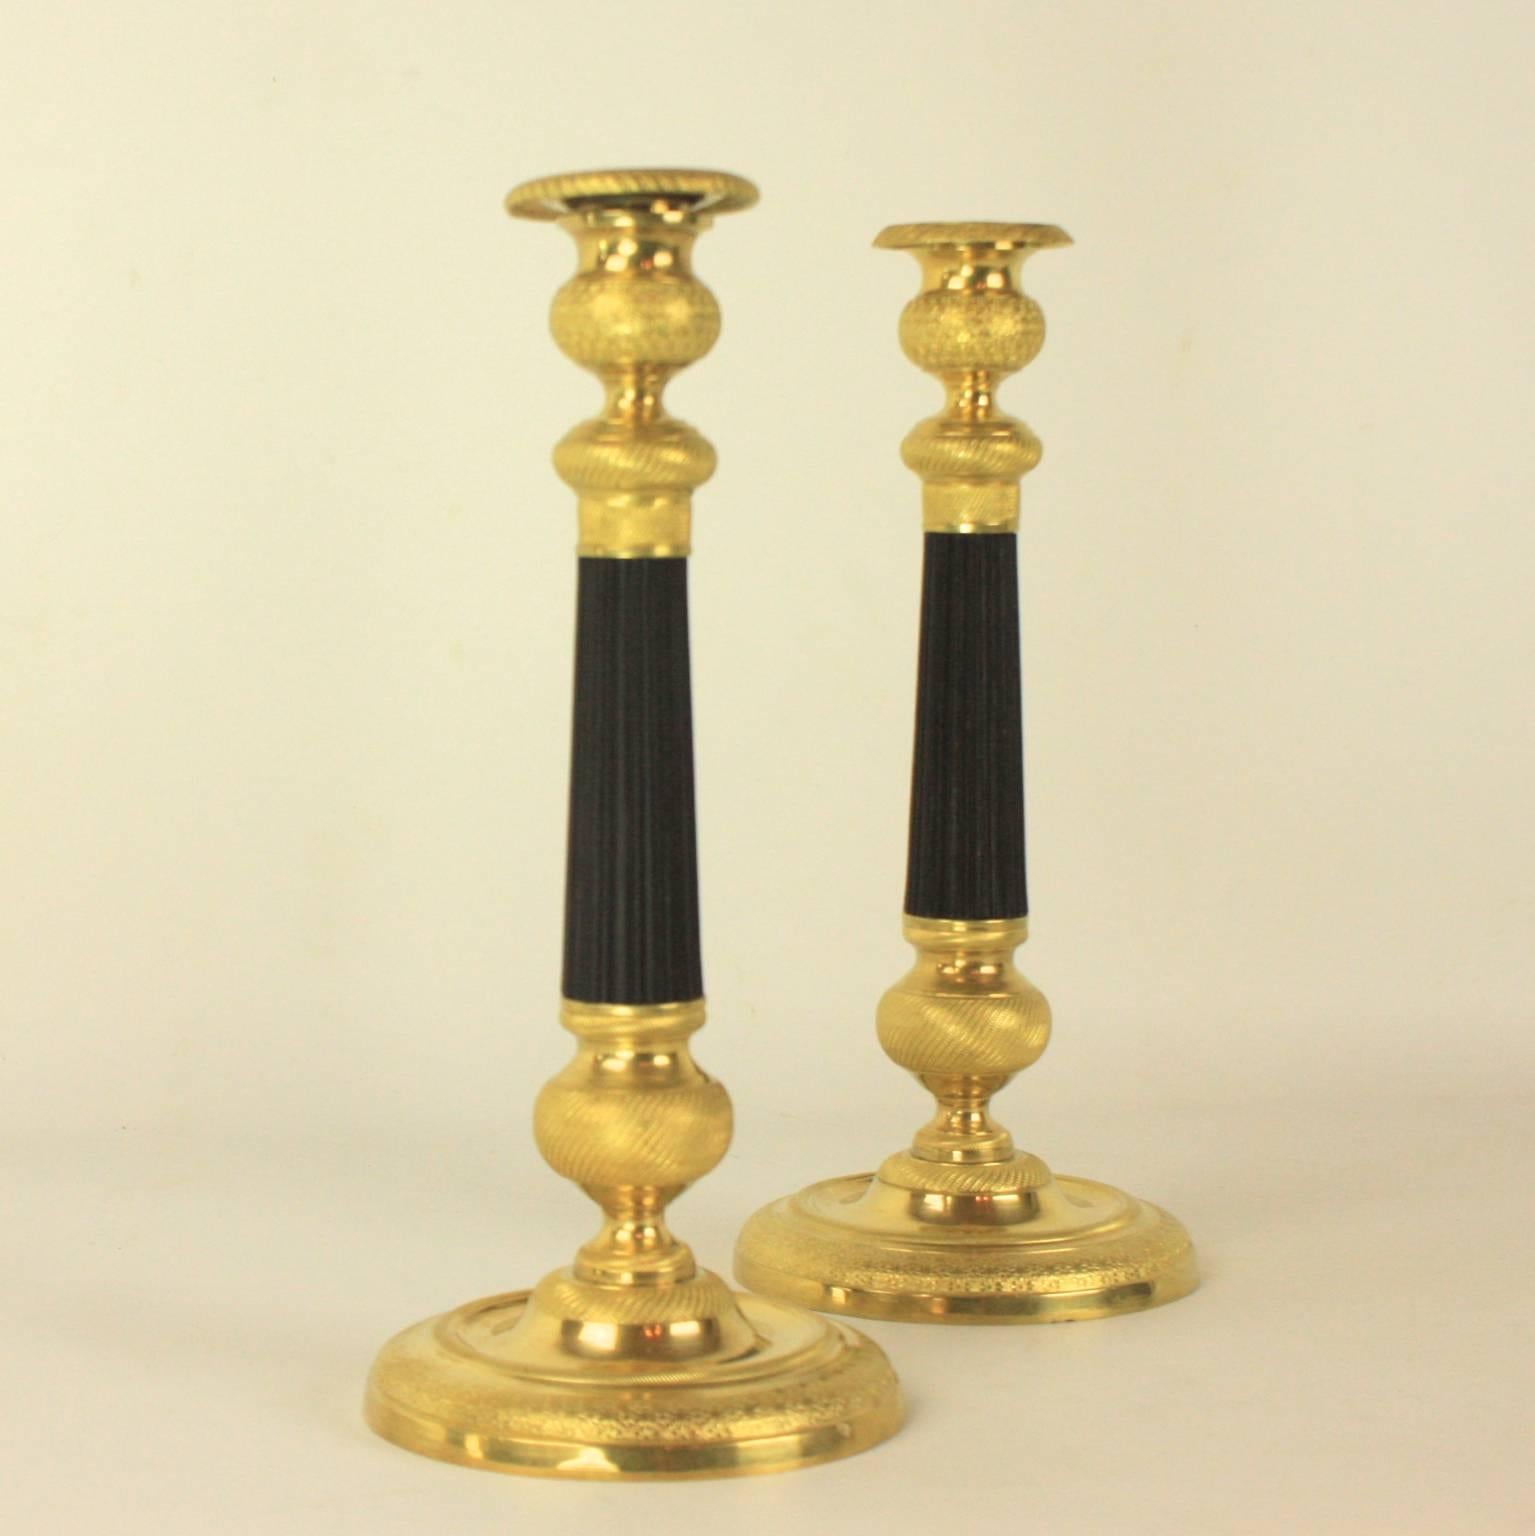 A pair of Charles X-patinated and gilt bronze candlesticks. The fluted, black patinated stem of each candlestick is highlighted on the top and bottom by an intricately sculpted pattern of beads and lines. The stem rests on a circular base accented